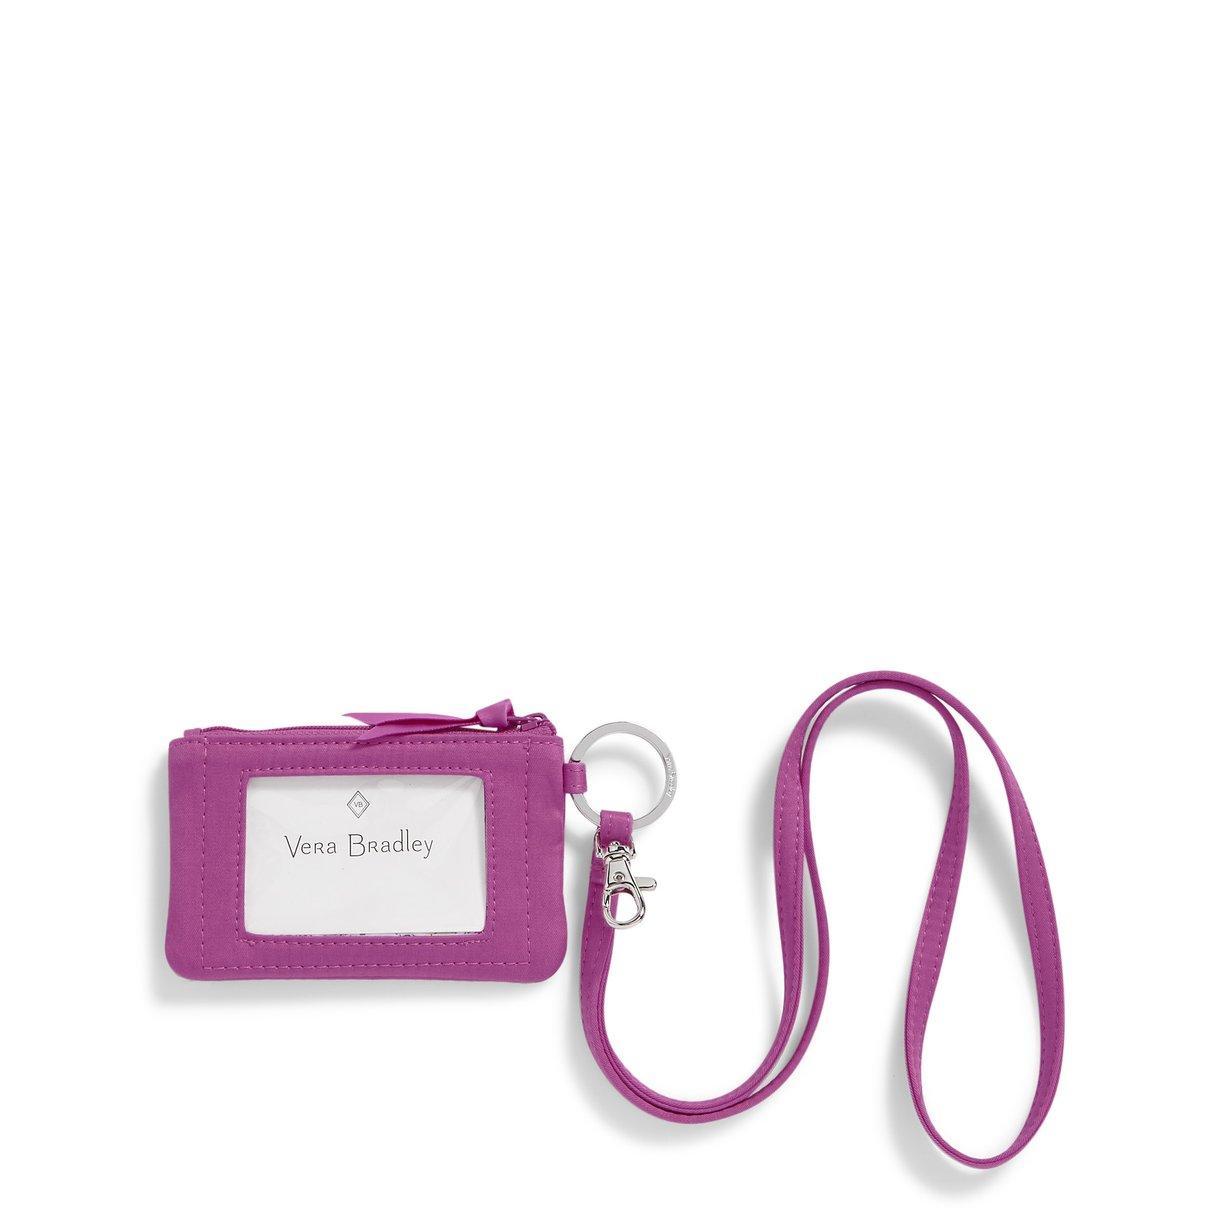 Zip ID Lanyard In Rich Orchid